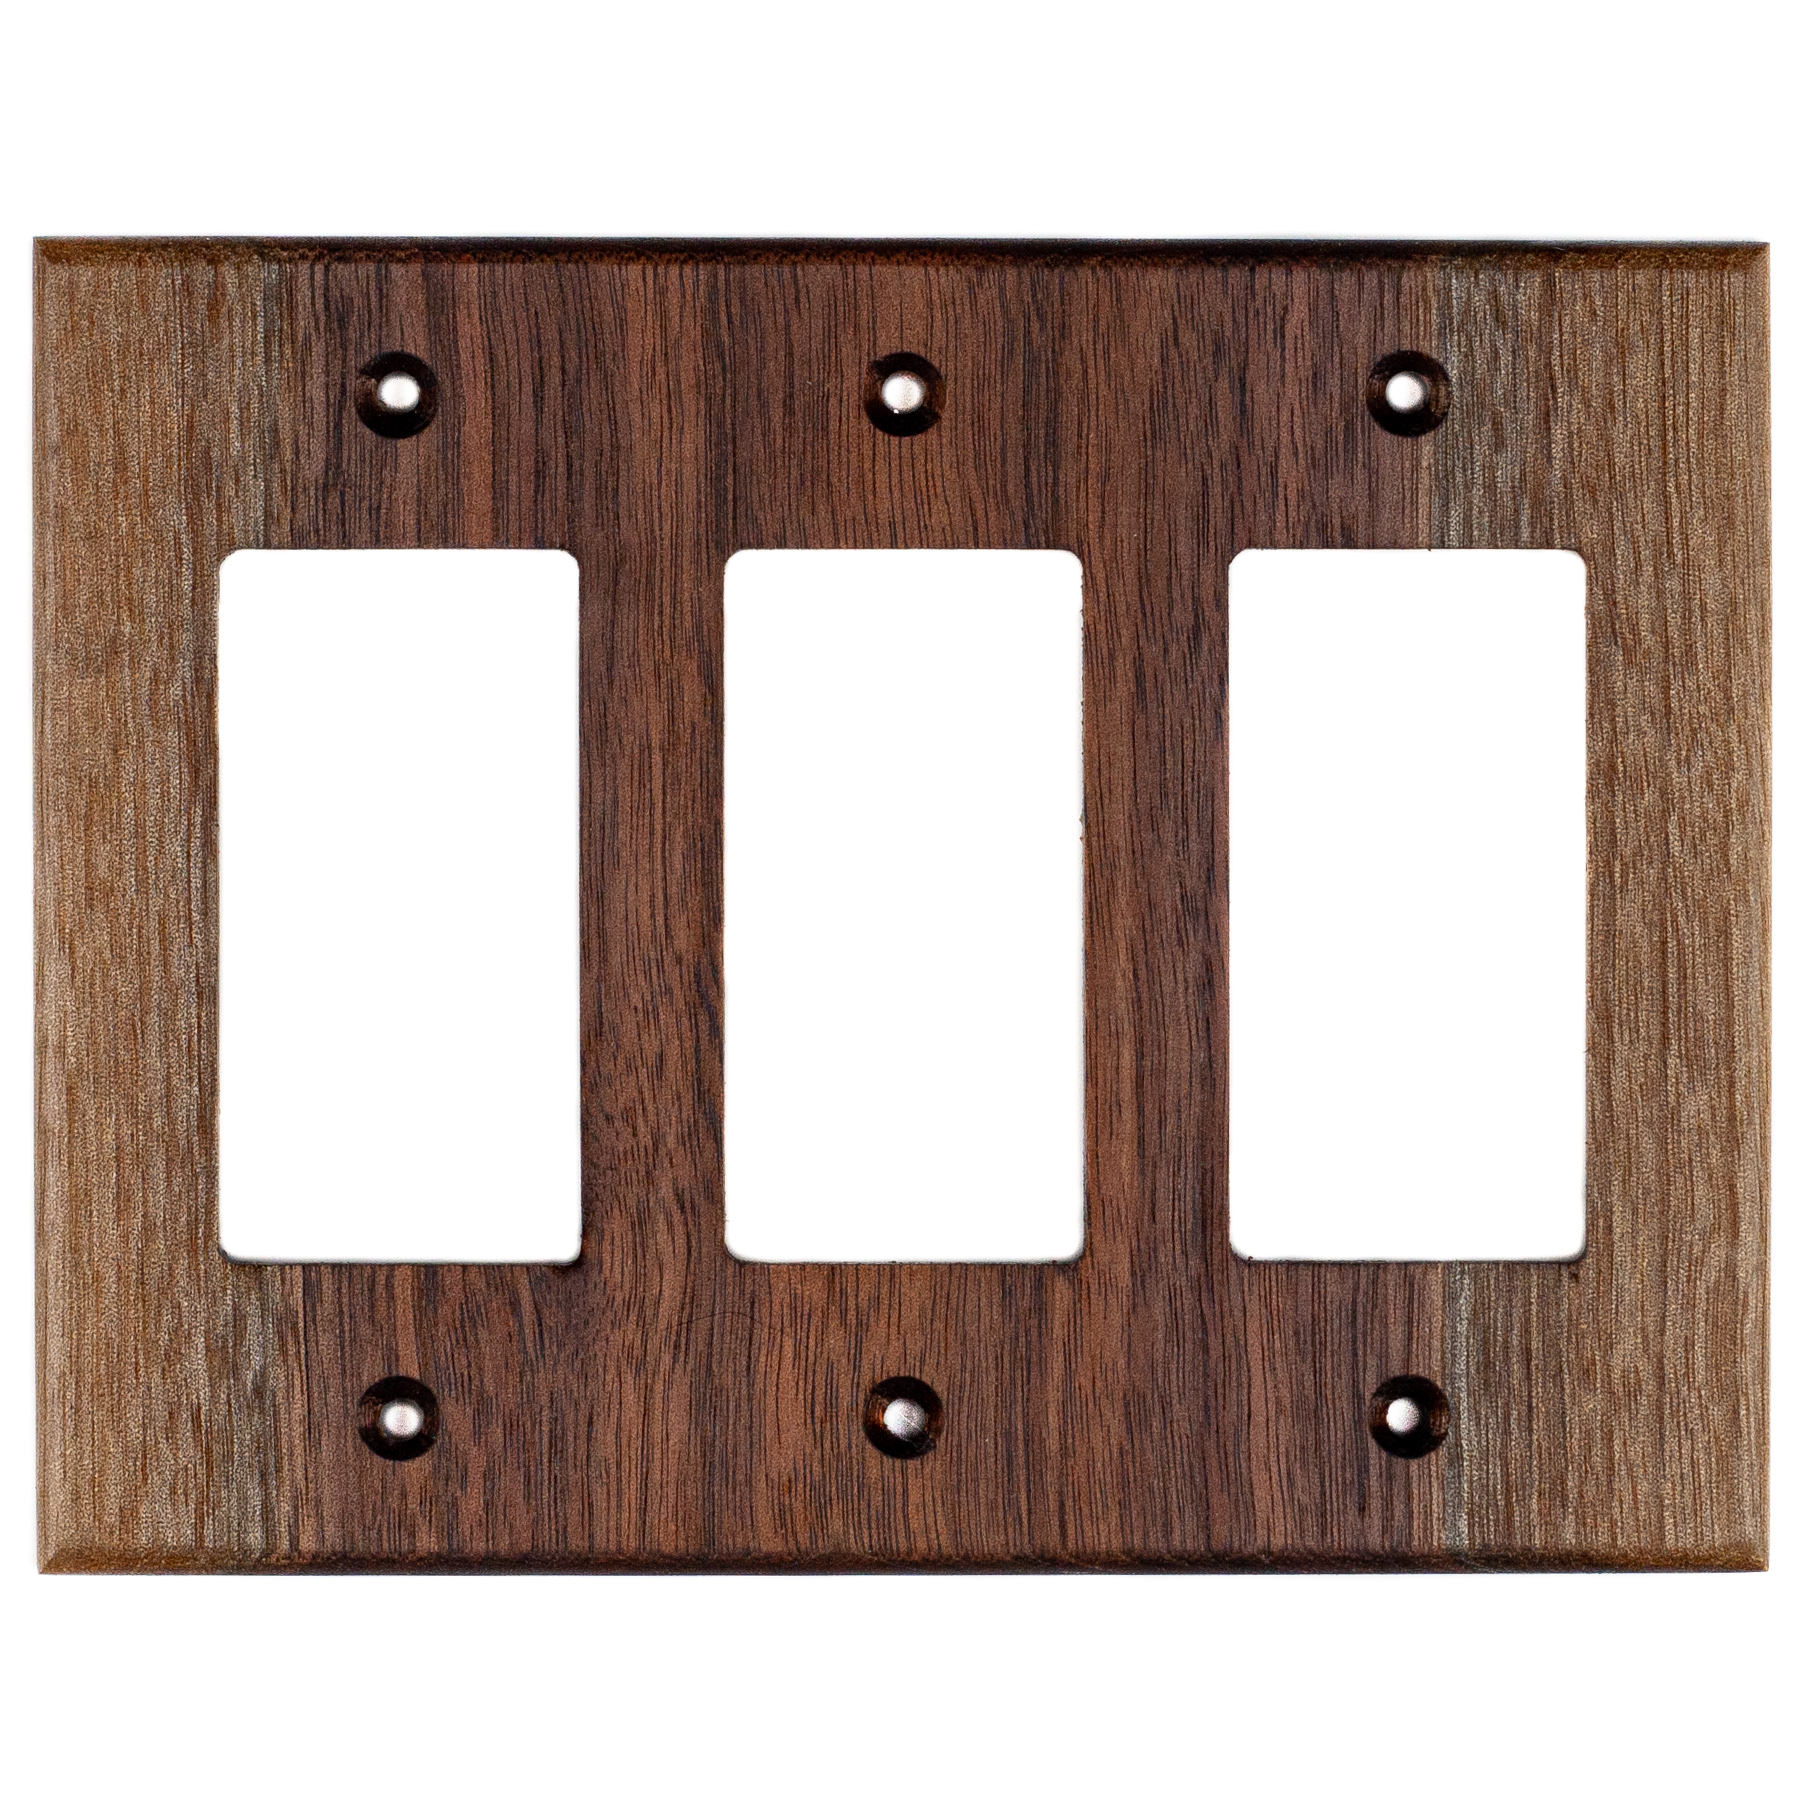 Wormy Chestnut Reclaimed Wood Wall Plate - 1 Gang Light Switch Cover -  Virgin Timber Lumber